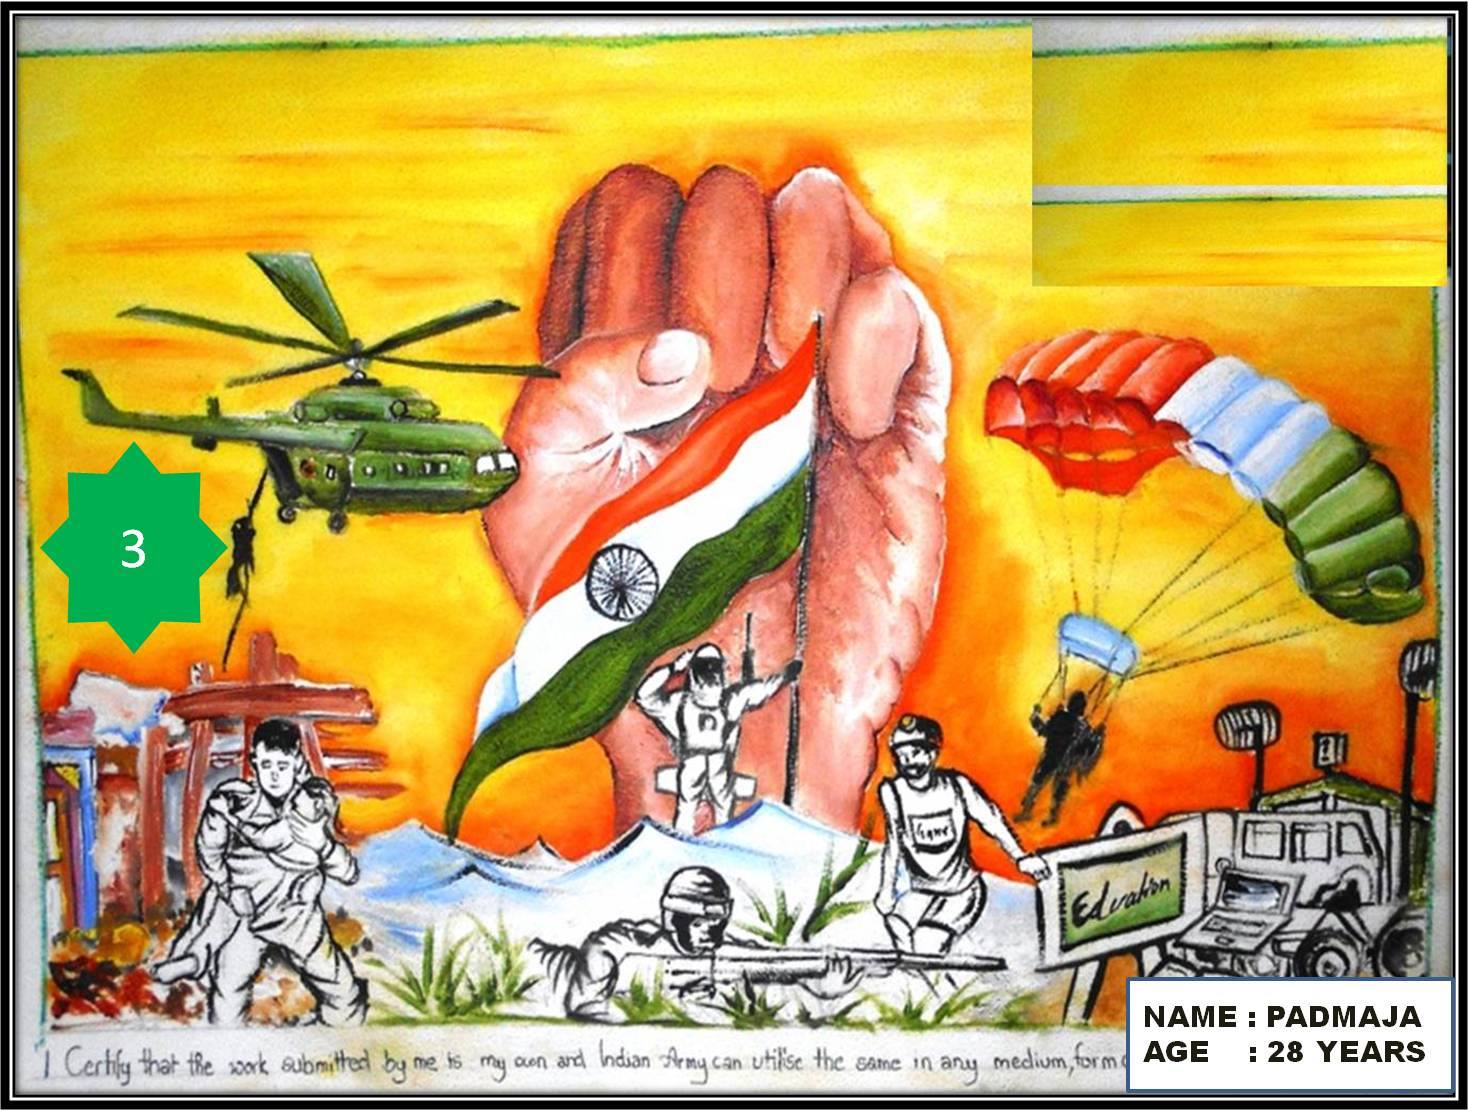 ADGPI - Indian Army - Online Painting Competition on Army Day 2017  #MySpace. This Painting is by Isha Purohit, Age 12 Yrs, reflects #IndianArmy-  For your Security and Well Being . JAI HIND | Facebook